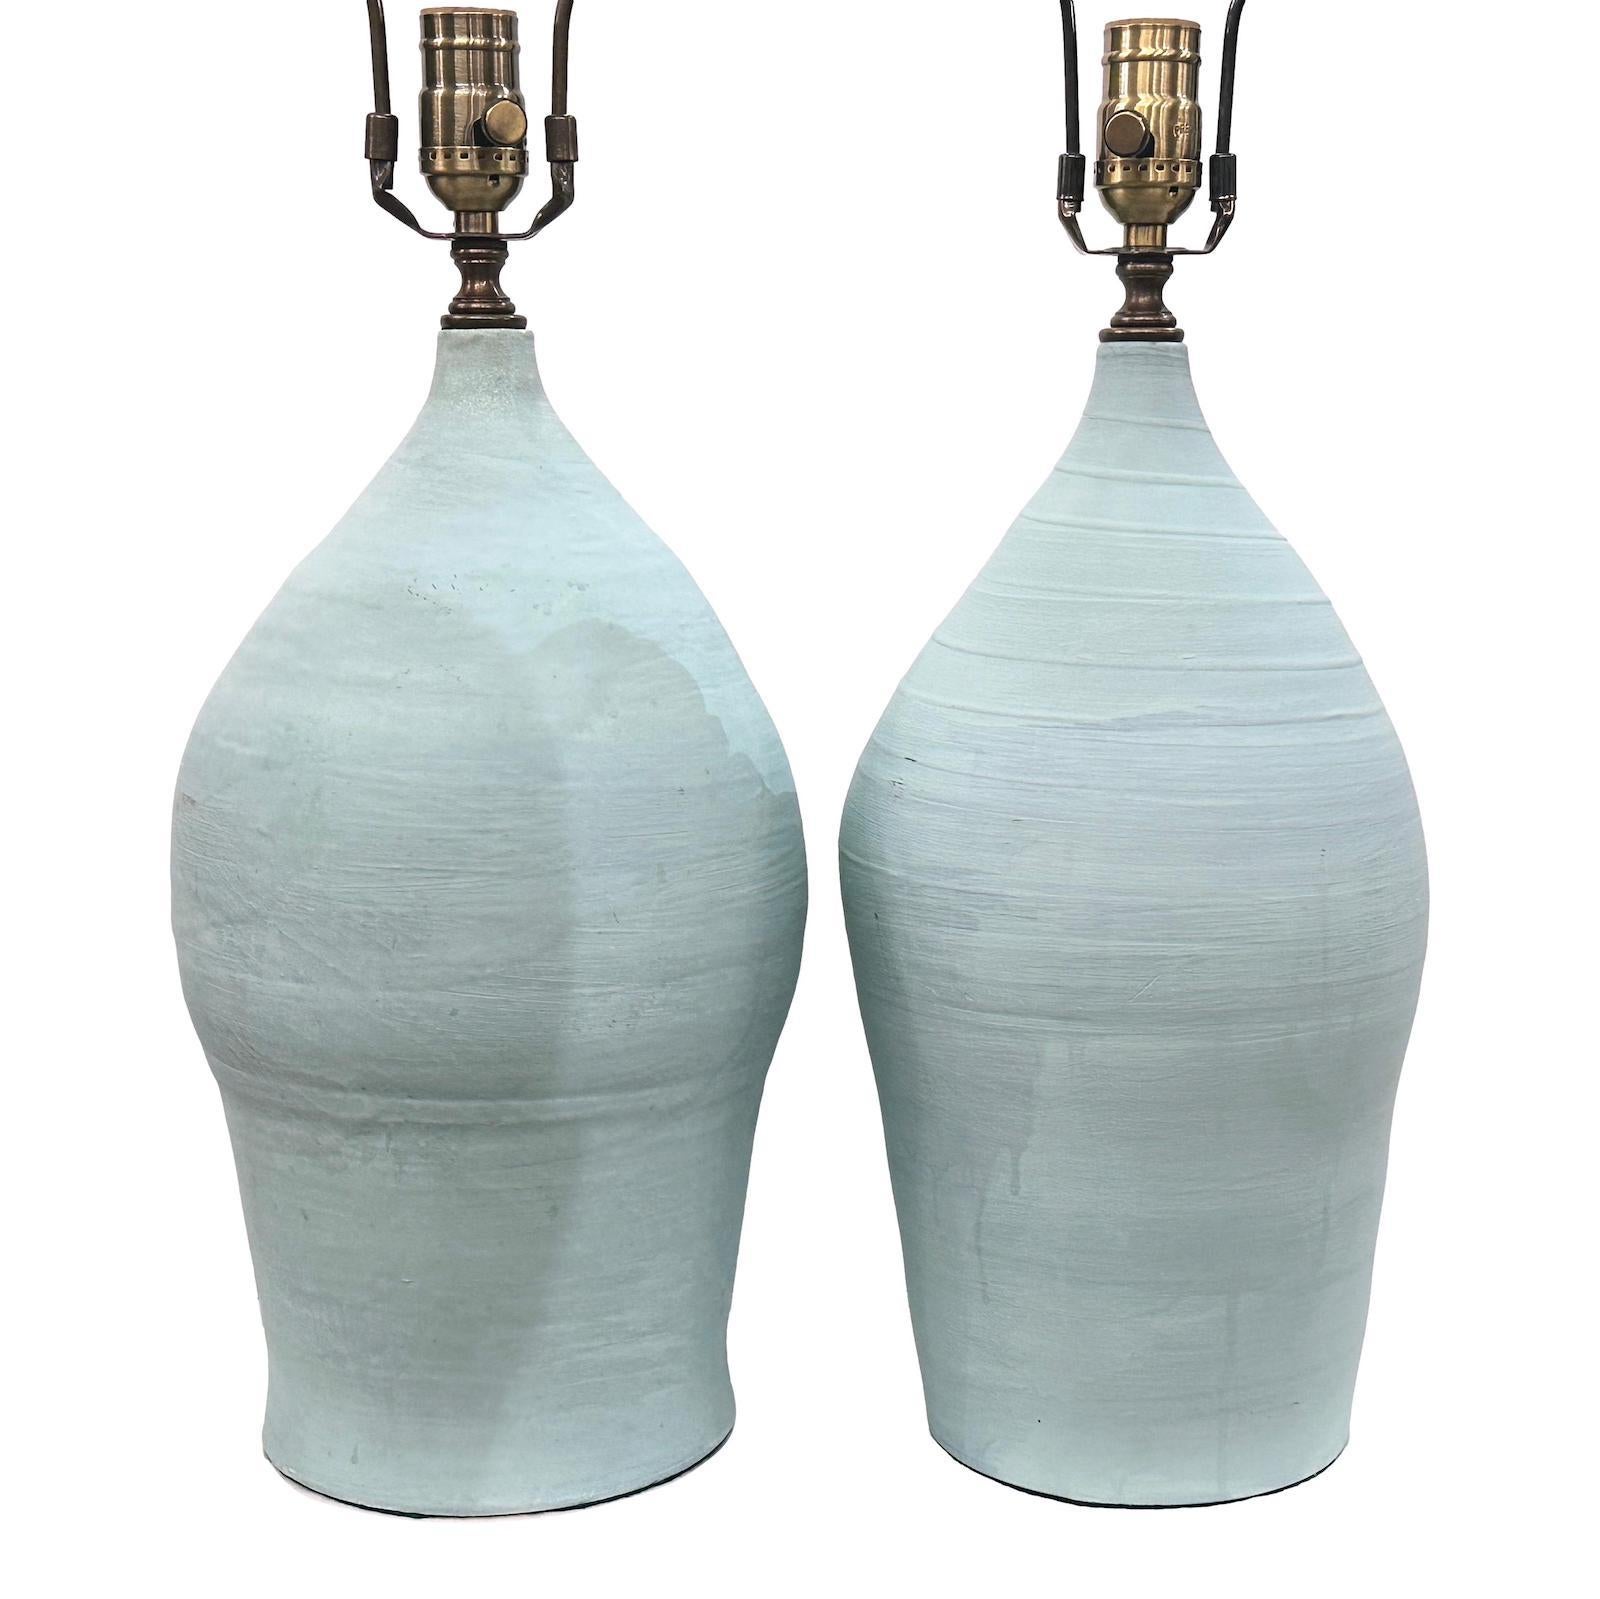 A pair of circa 1950’s Italian ceramic table lamps.

Measurements:
Height of body: 16″
Height to shade rest: 26″
Diameter: 7″